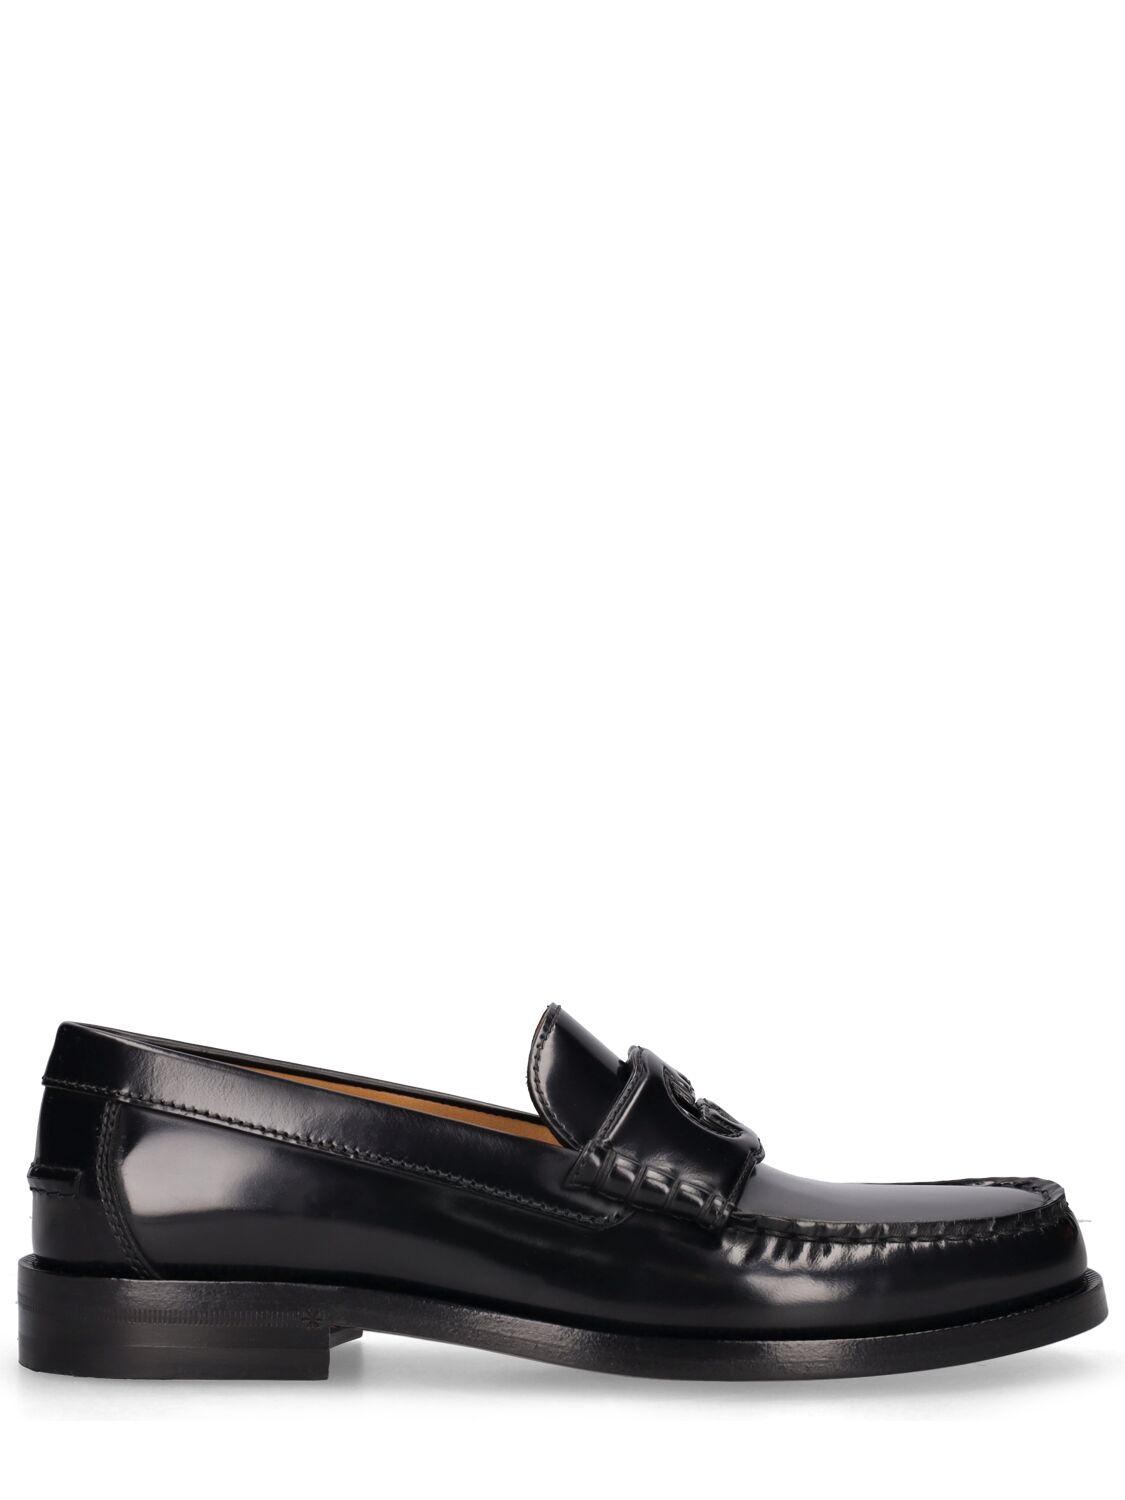 GUCCI 15MM GUCCI CUT LEATHER LOAFERS